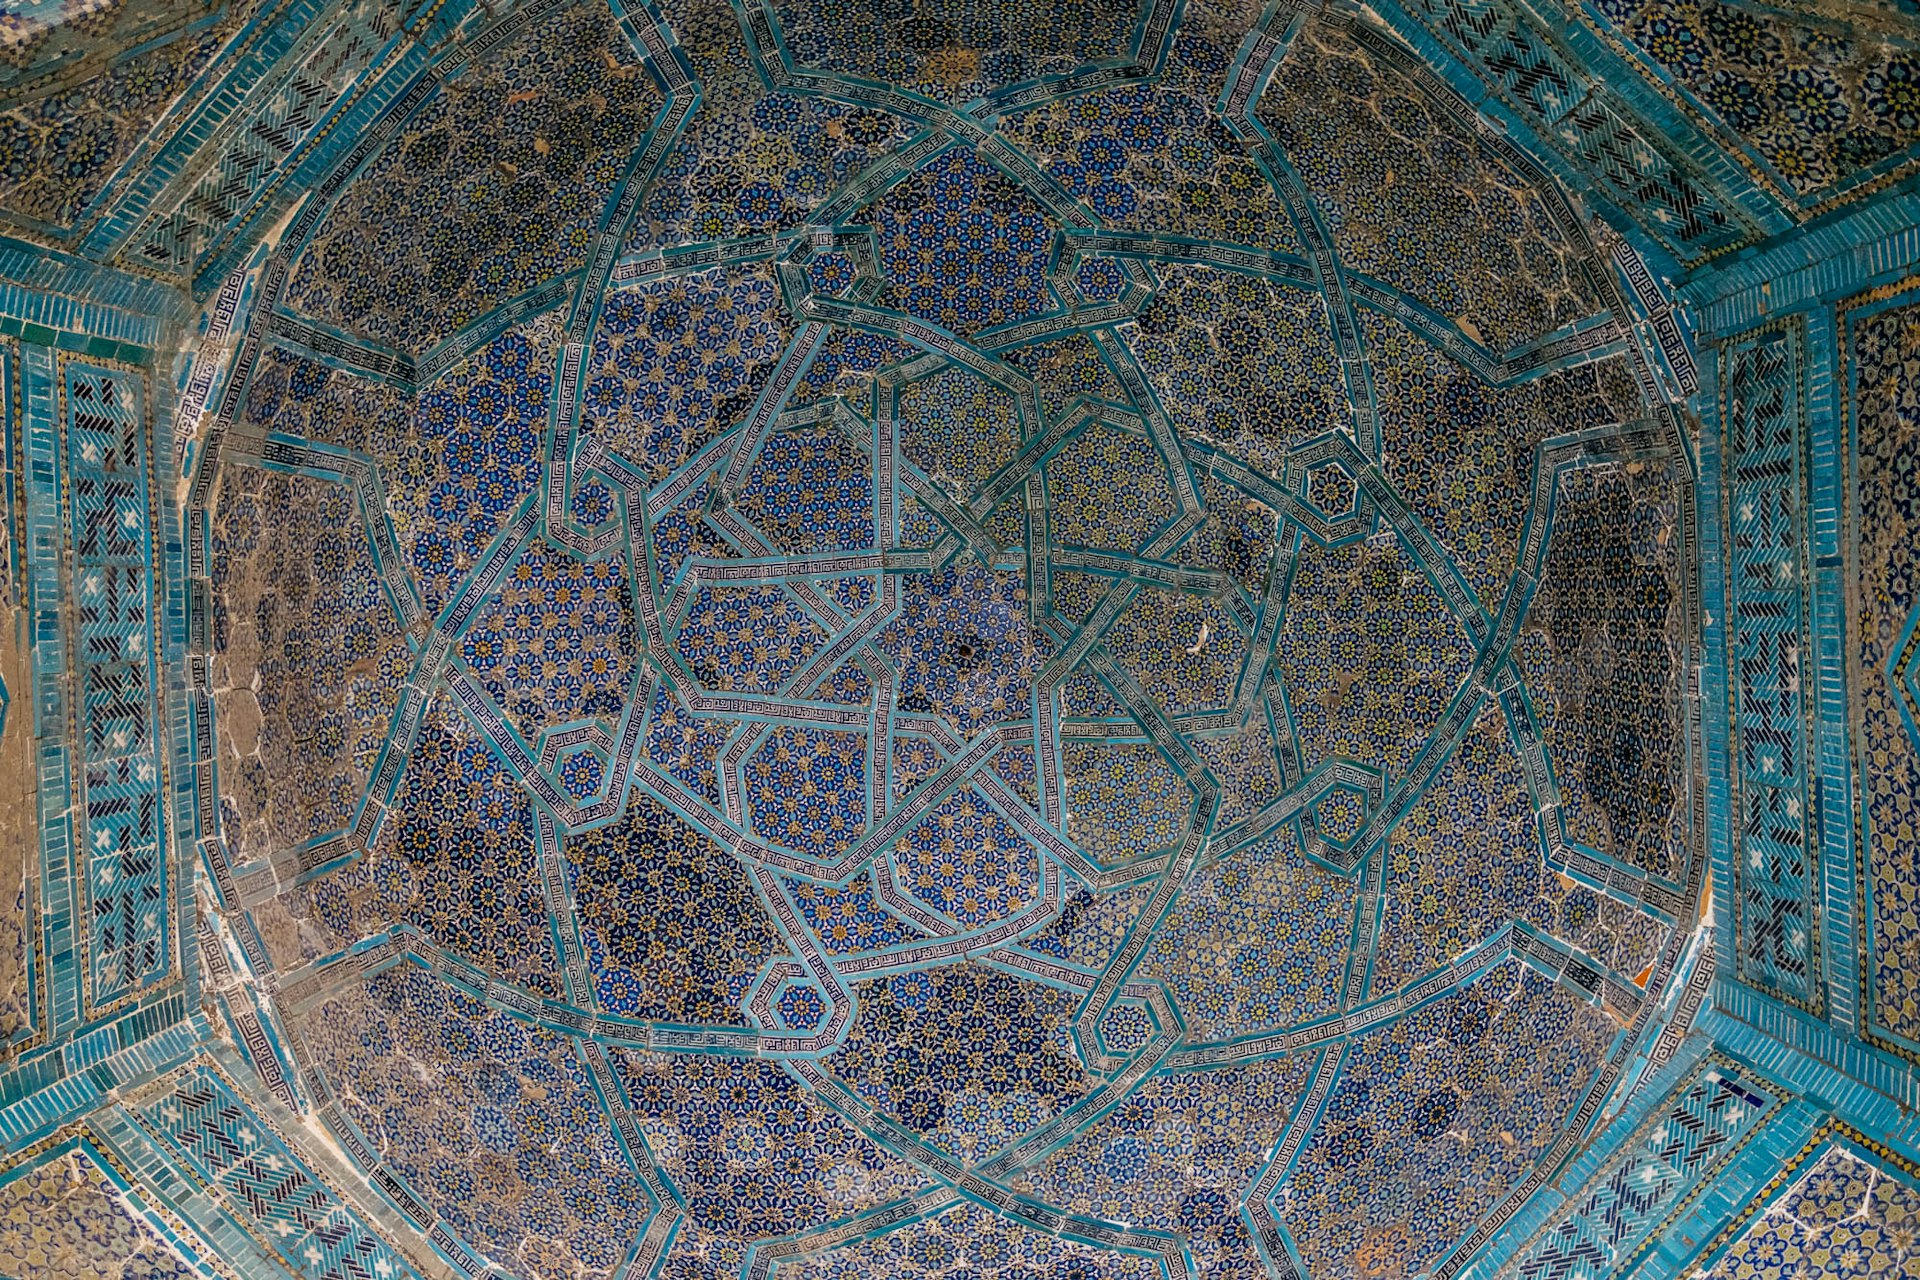 Ceiling details from the Shah-i-Zinda tomb complex, Samarkand